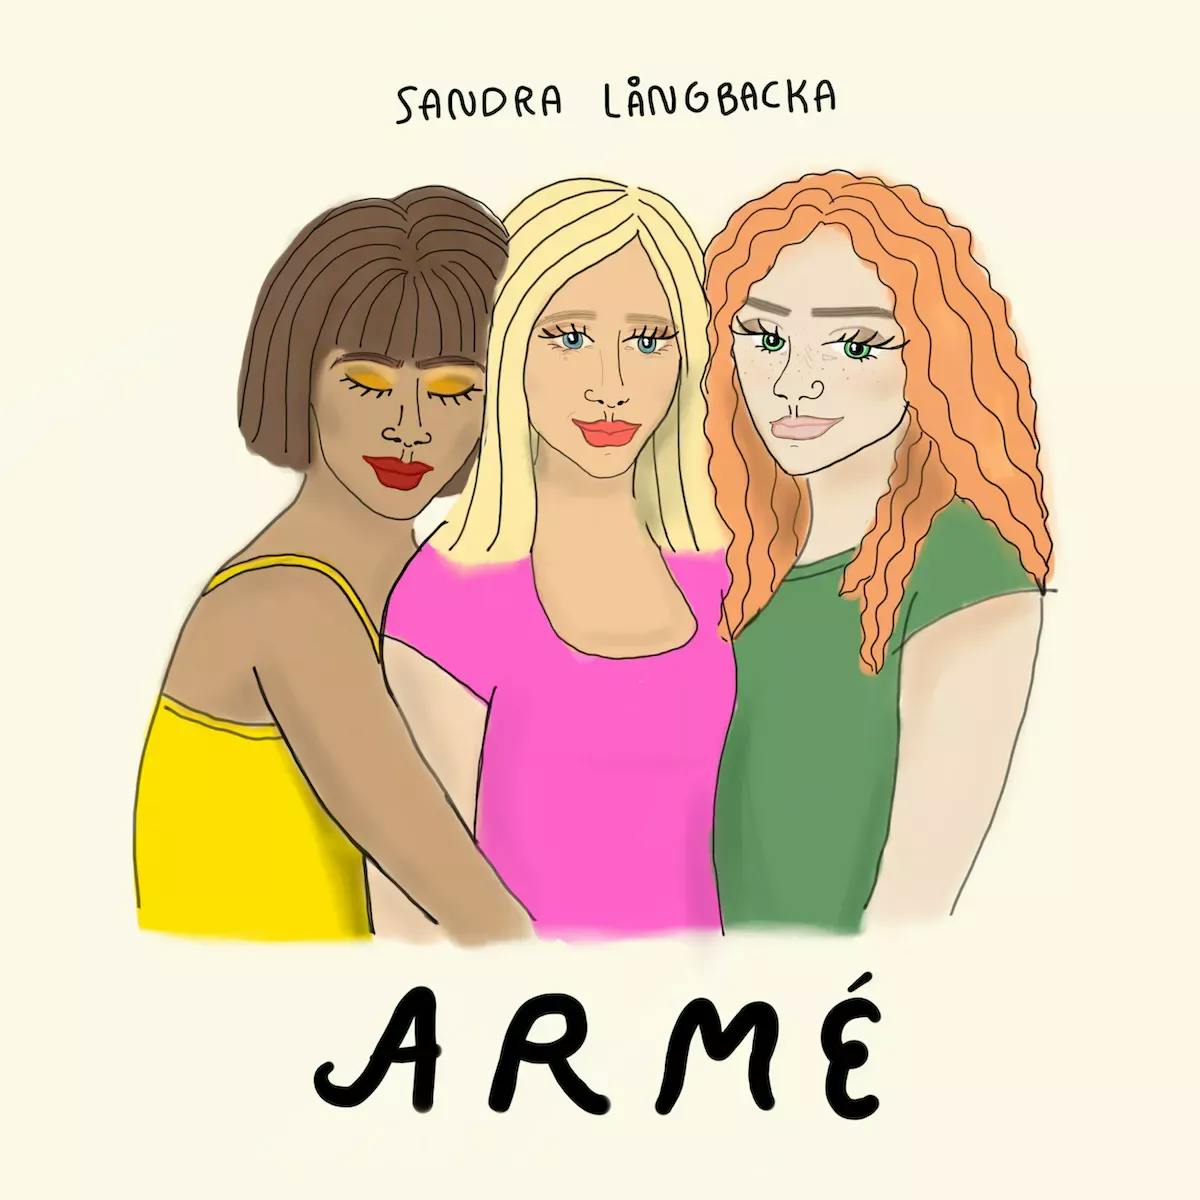 Animation of three girls hugging with text "Armé"